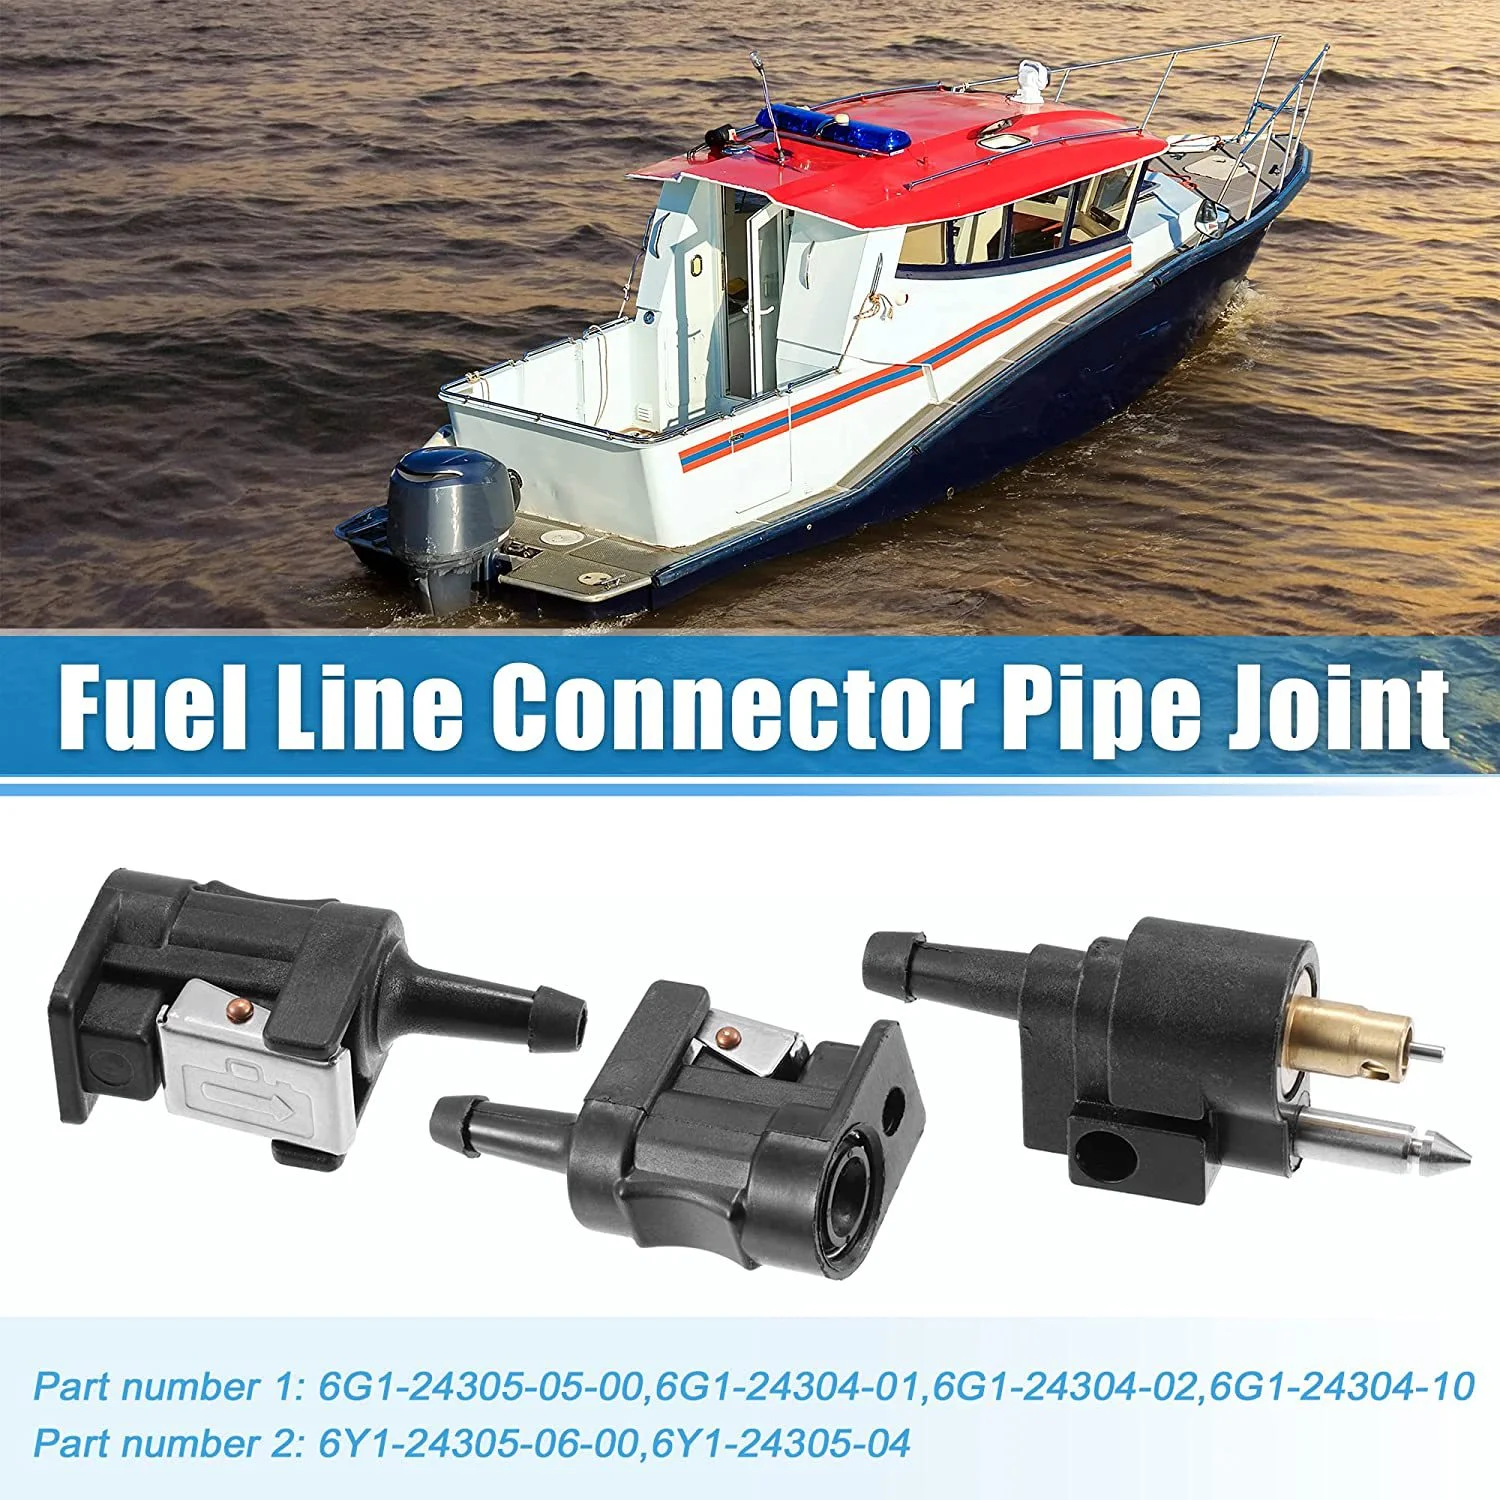 Marine Outboard Oil Tank Fuel Line Male/ Female Sockets Quick Coupling Yachts/Fishing Boats/Fast Boats/Cruise Ships Accessories mini usb cable 5 pins male to male fast data charger cables for mp3 mp4 player car dvr gps digital camera hdd mini usb cord line